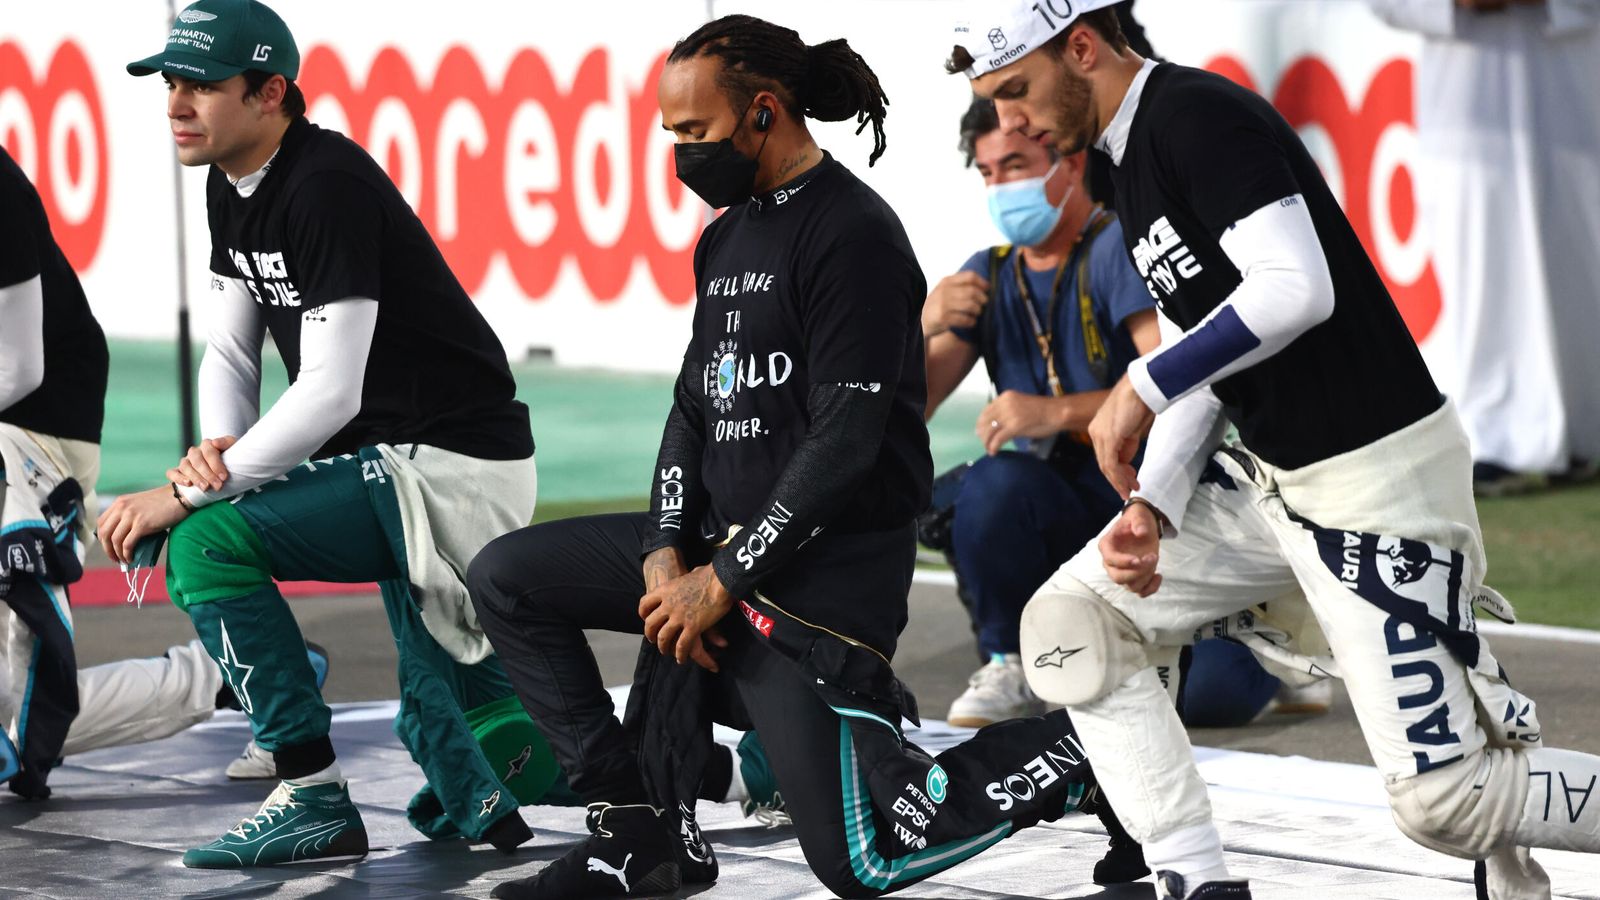 F1 to ‘take action’ on anti-racism instead of ‘gestures’, confirms sport’s boss Stefano Domenicali